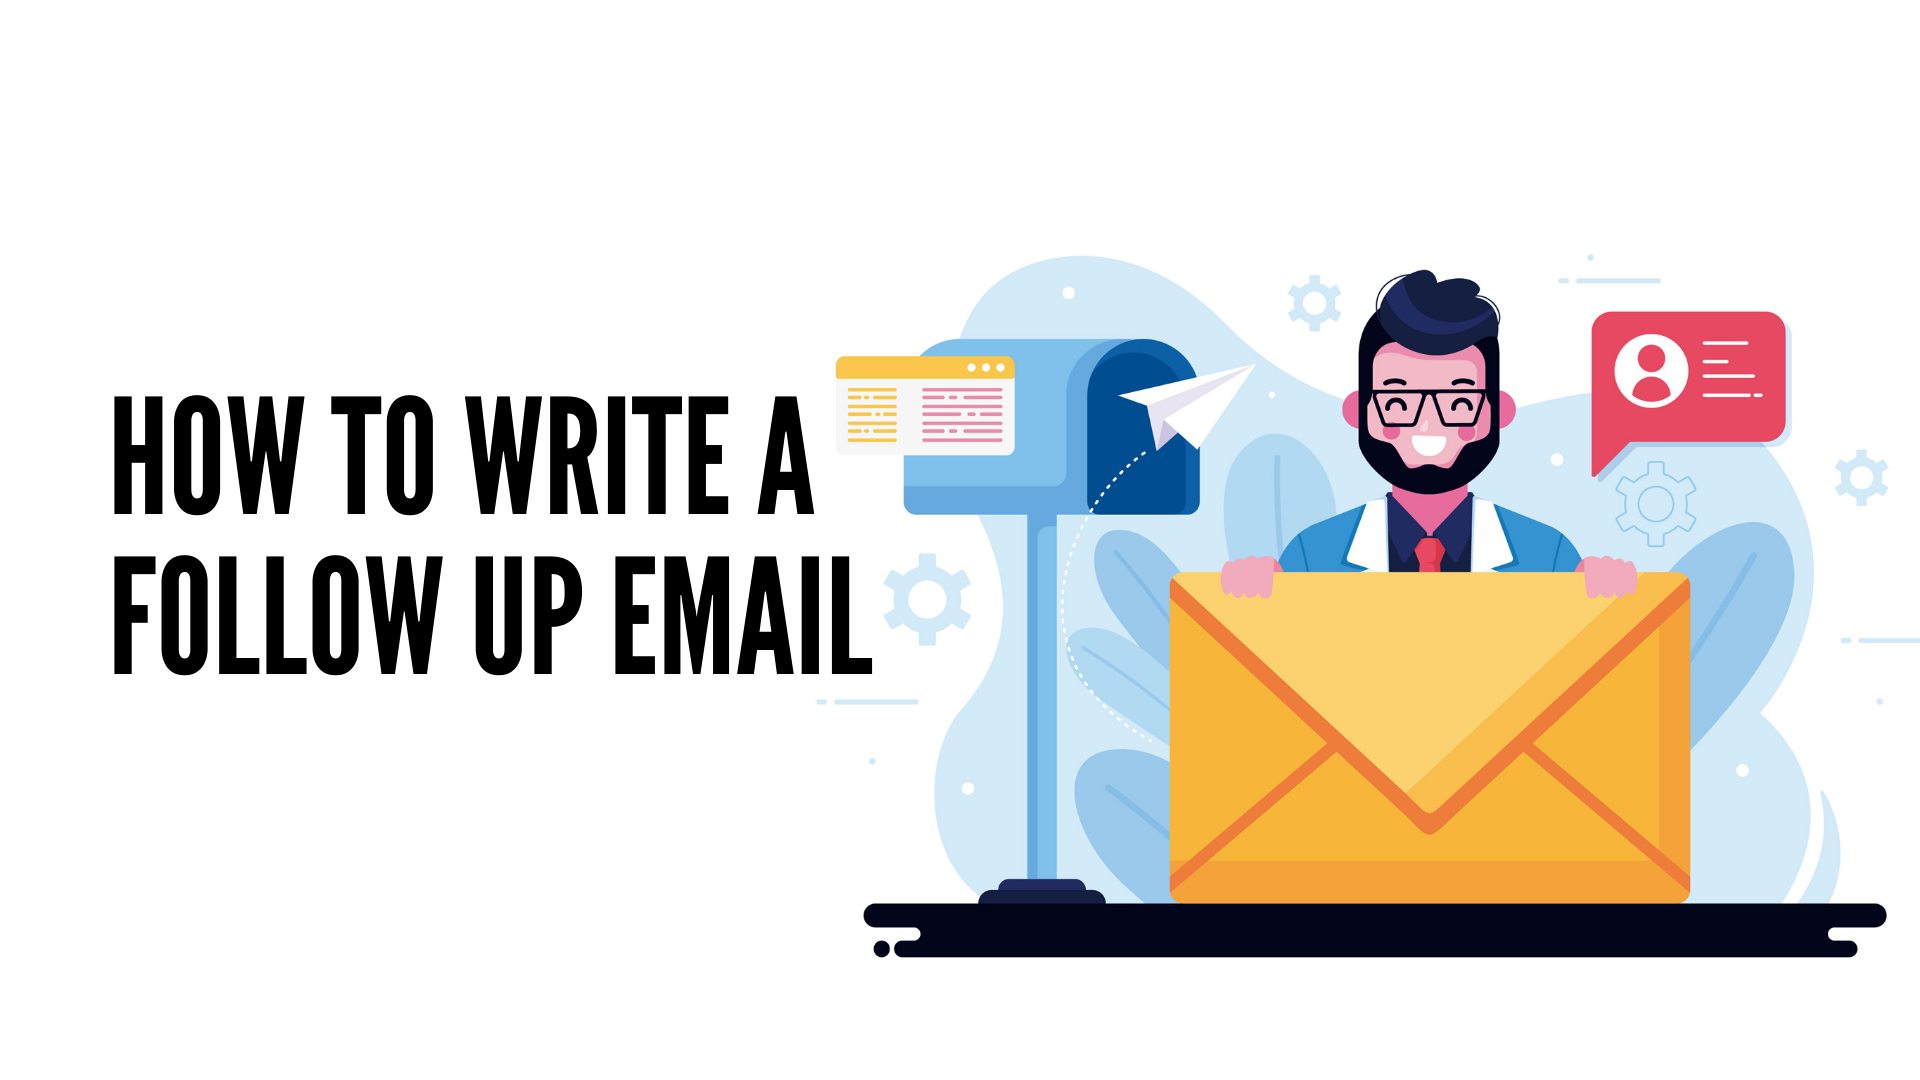 How to Write a Follow Up Email